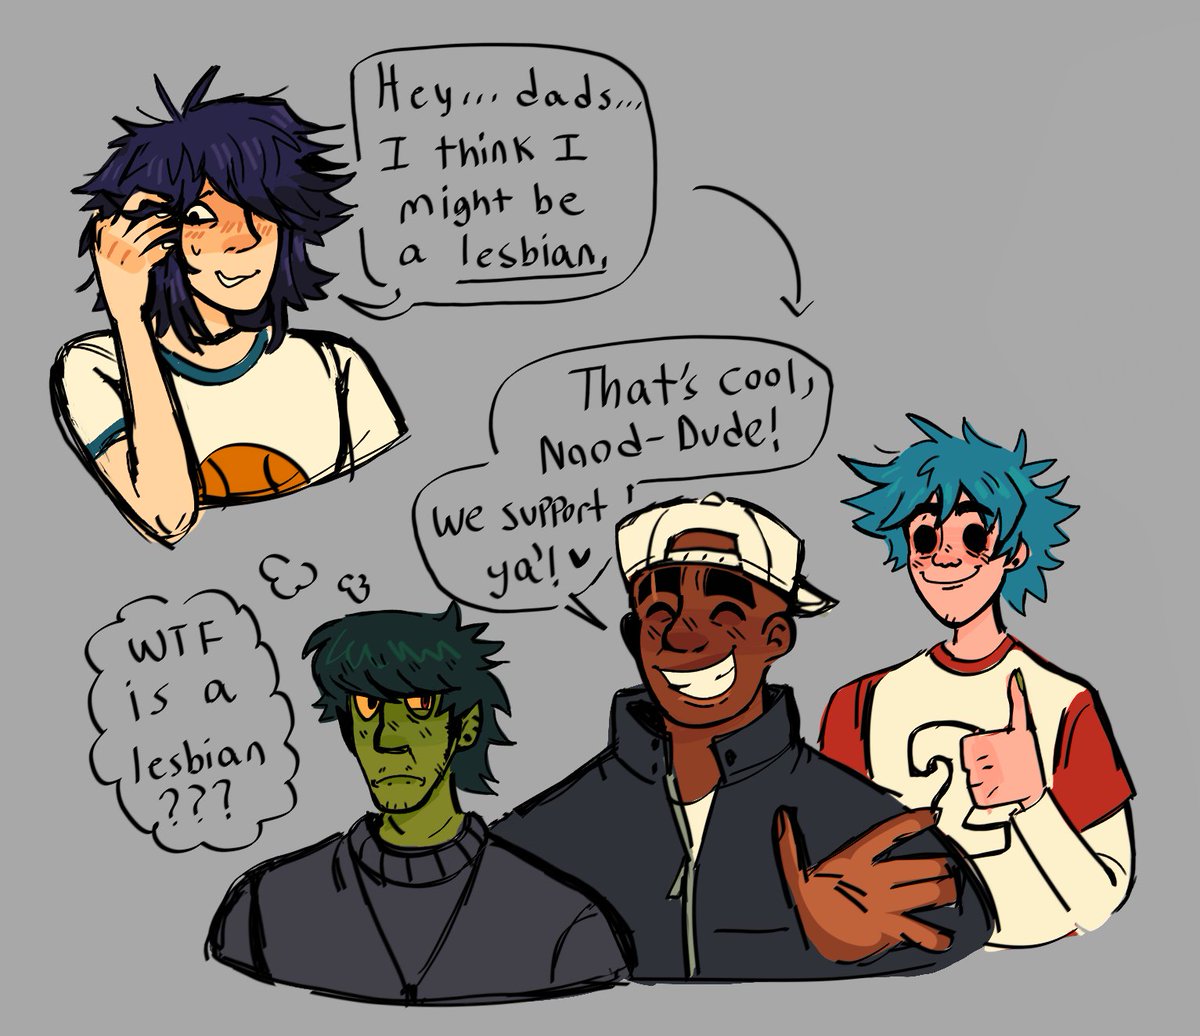 noodle coming out to her three fathers
#gorillaz